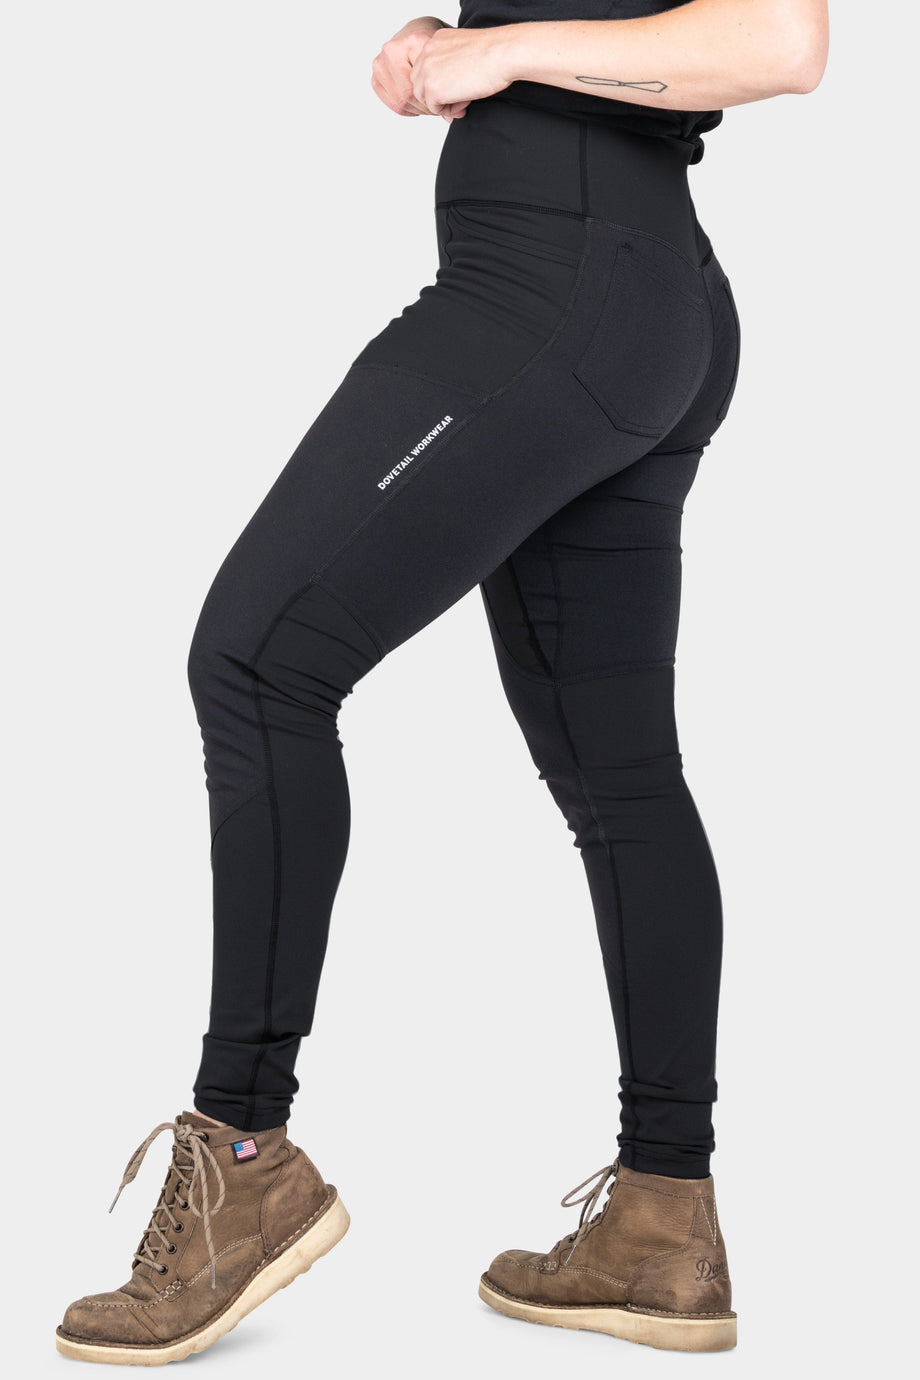 Farm & Home Hardware - Our Force Utility Leggings are meant to get